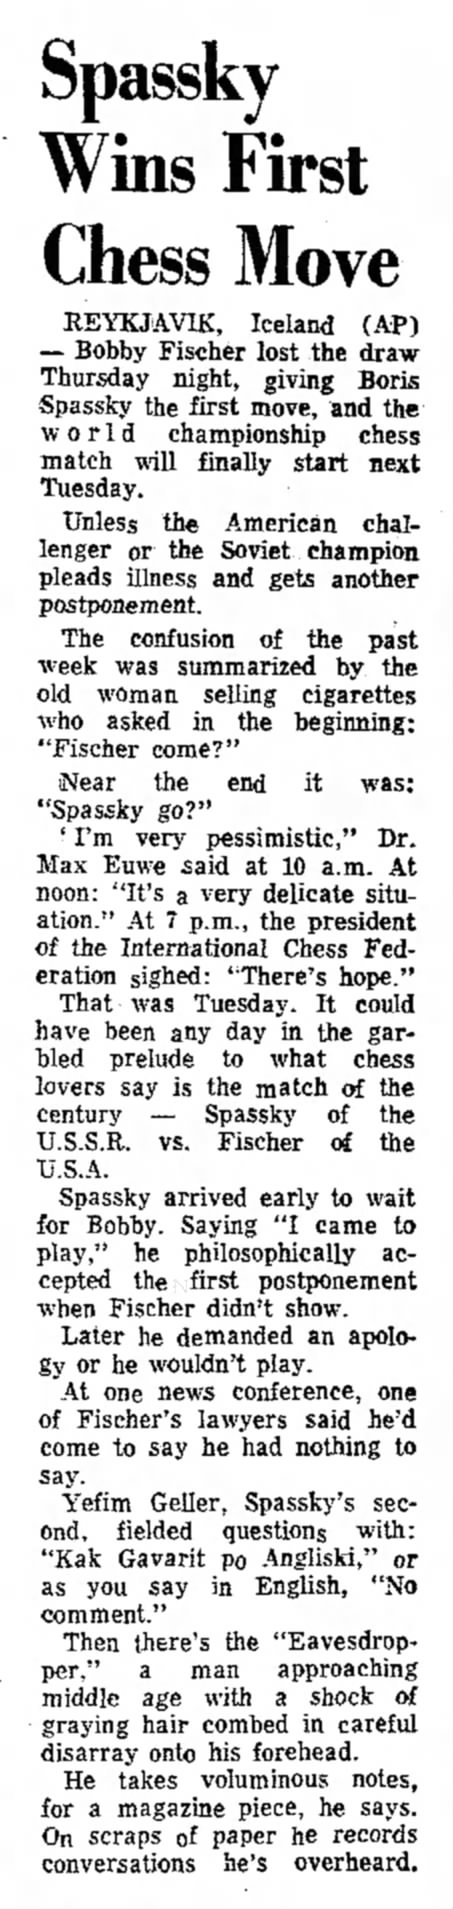 Spassky Wins First Chess Move